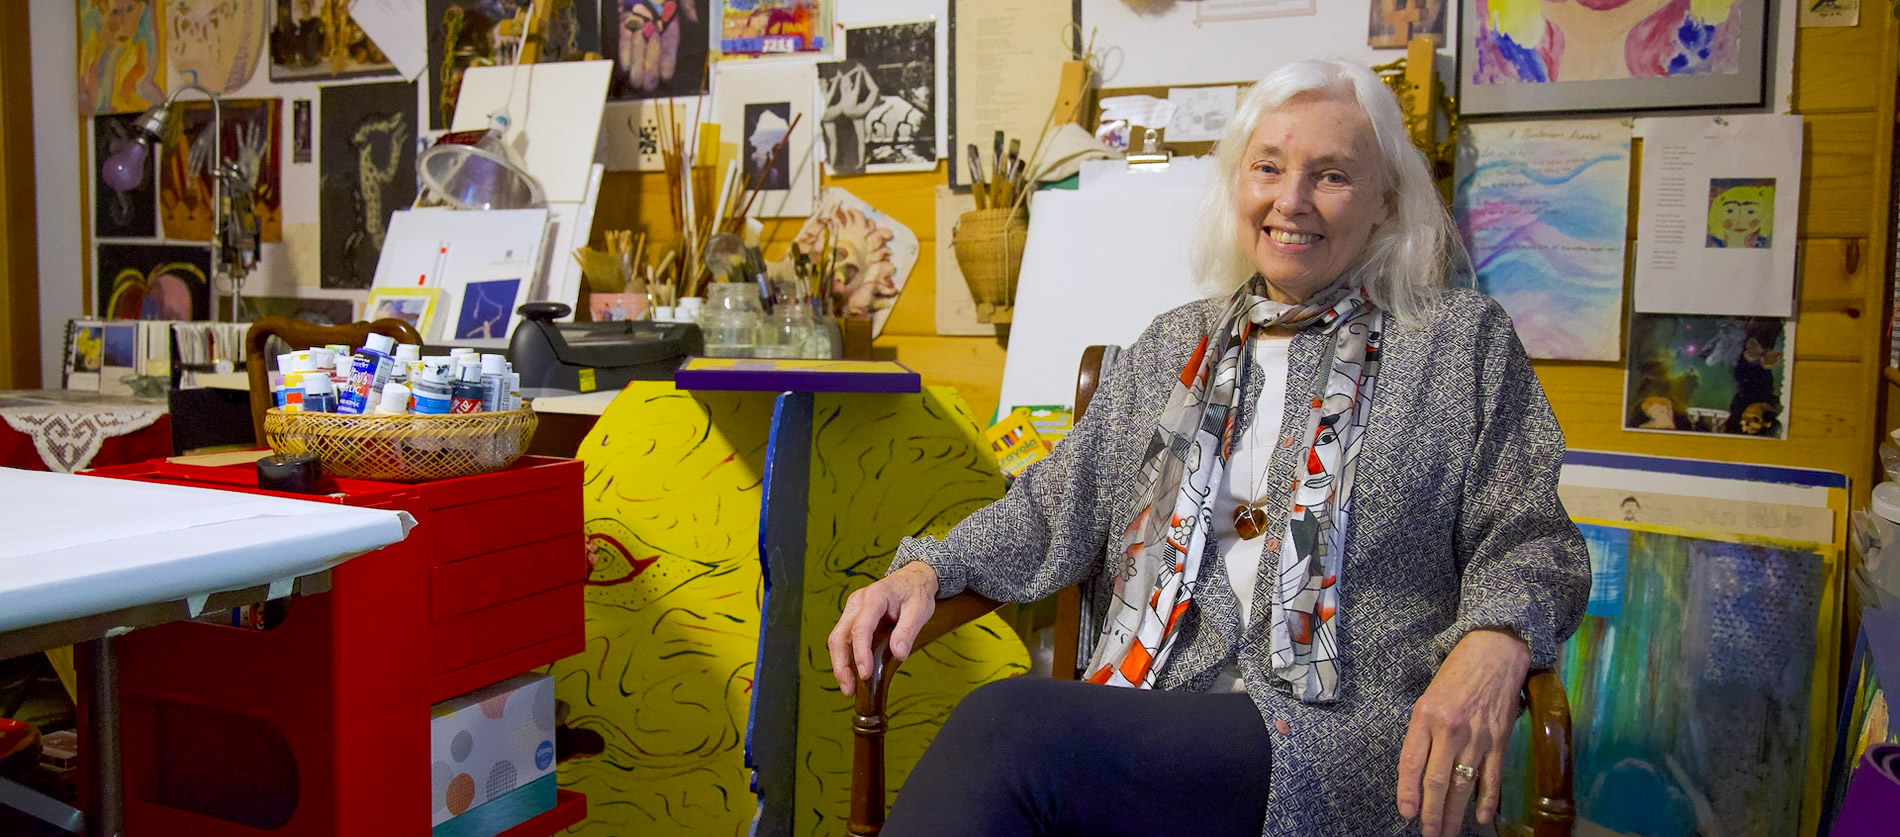 joan stanford in her art studio at stanford inn and resort on the mendocino coast